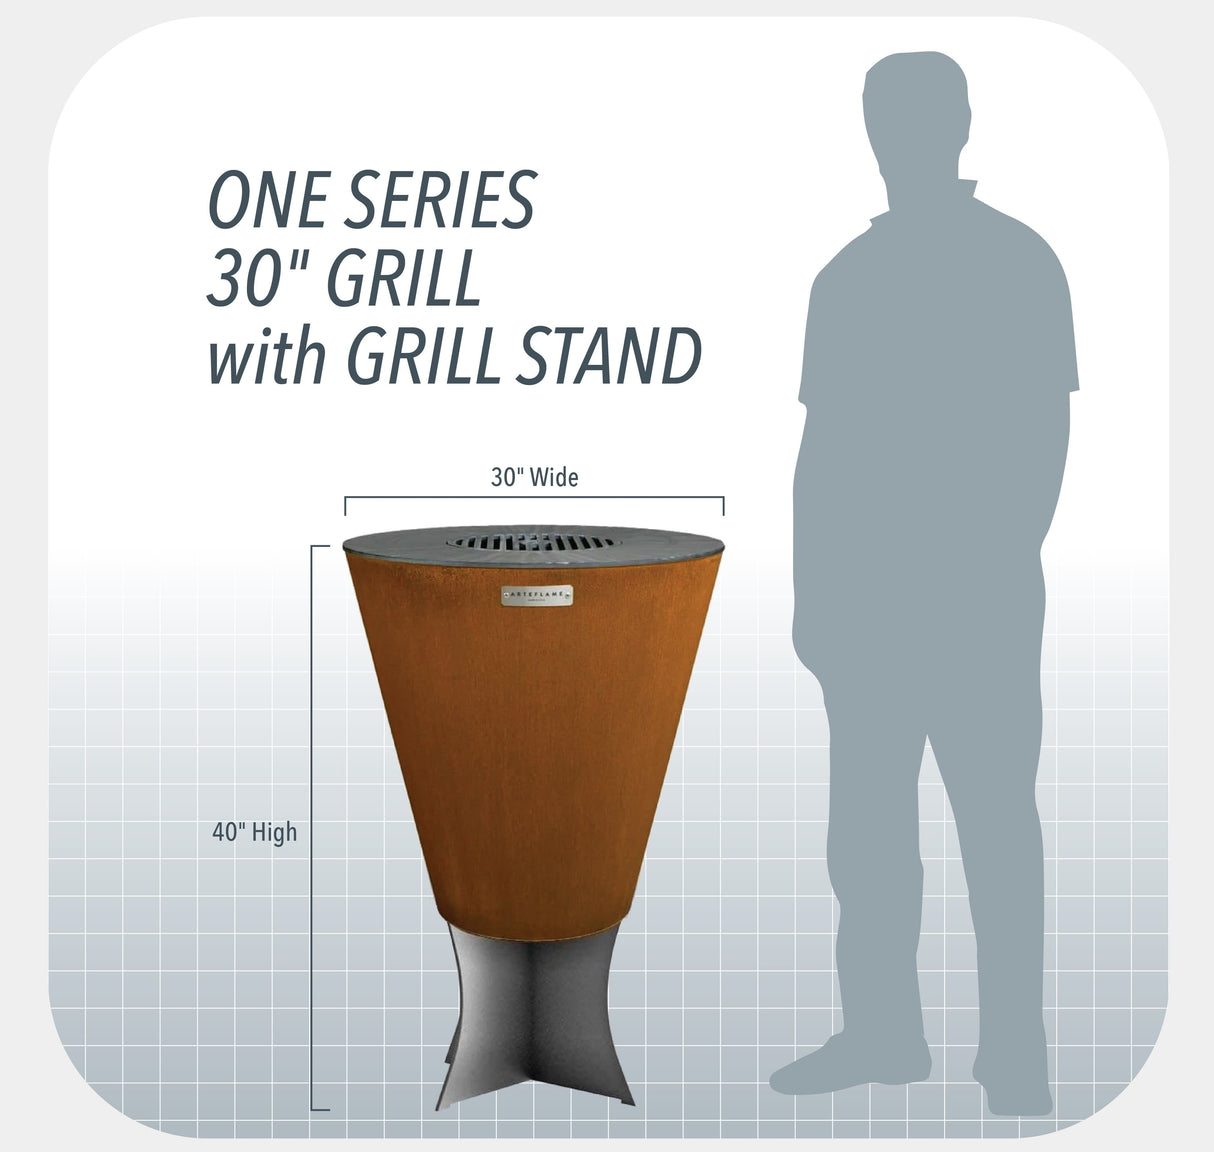 One30 Grill Stand at Bar Height.